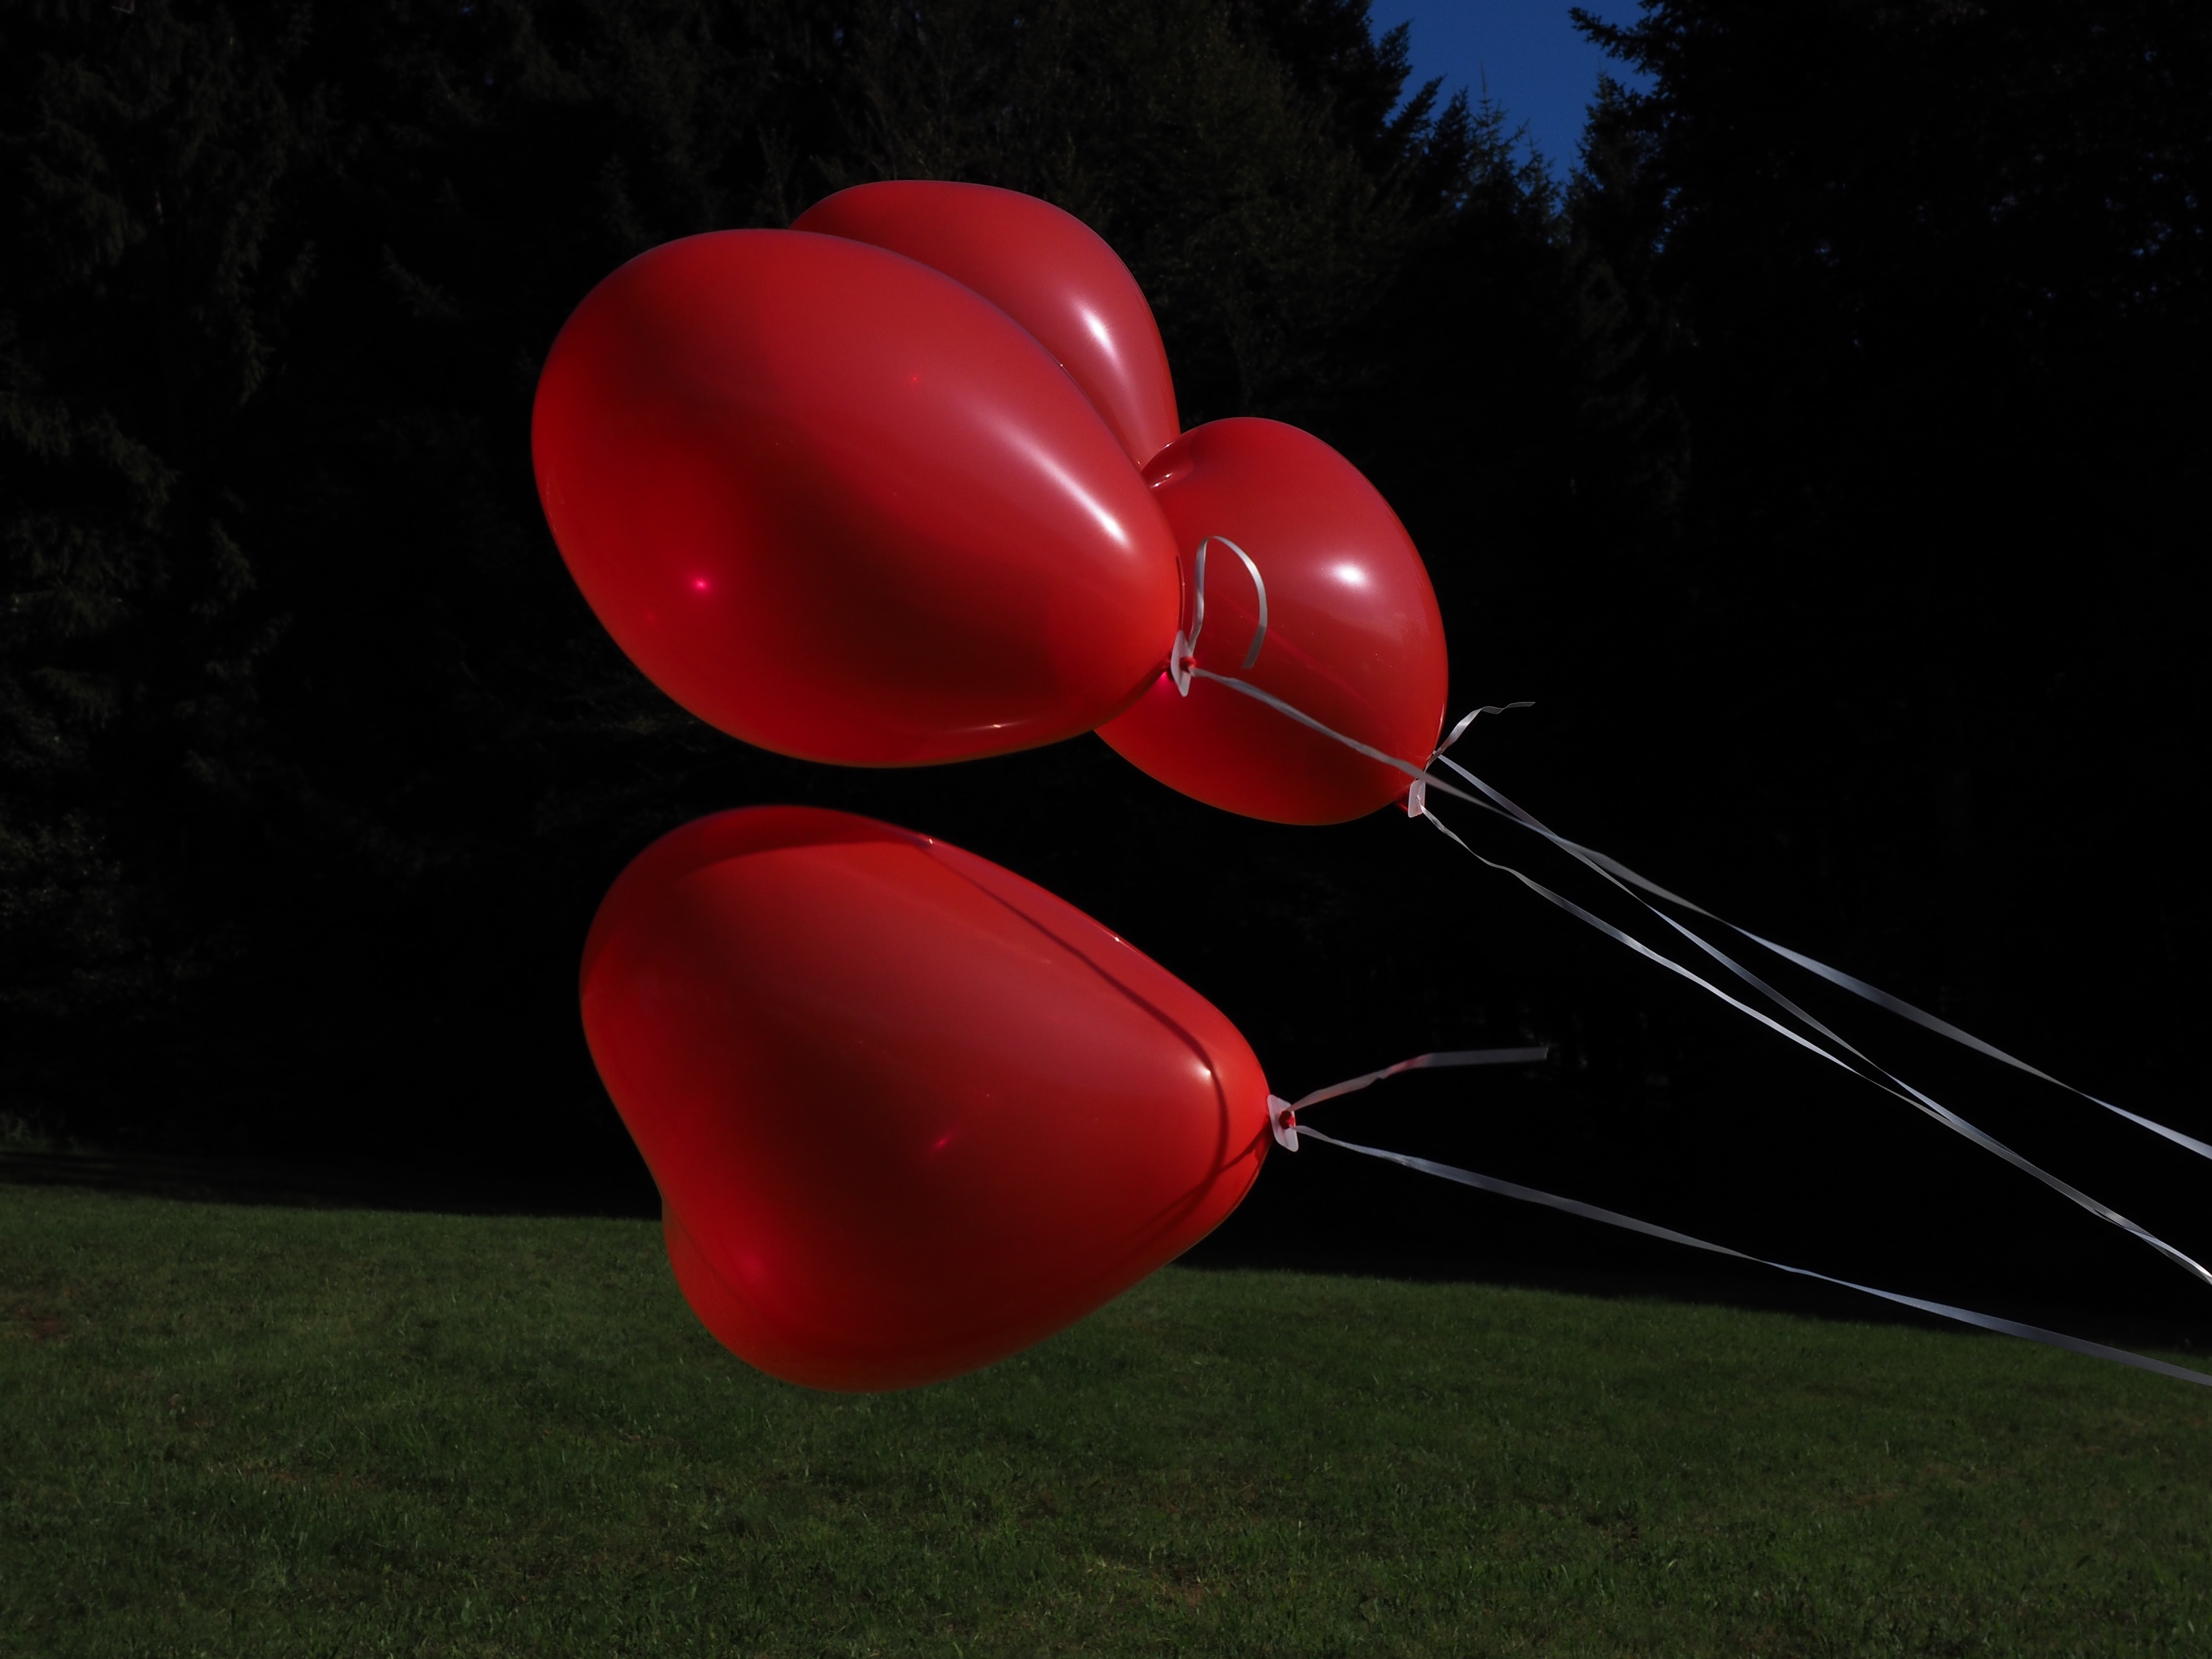 red balloons